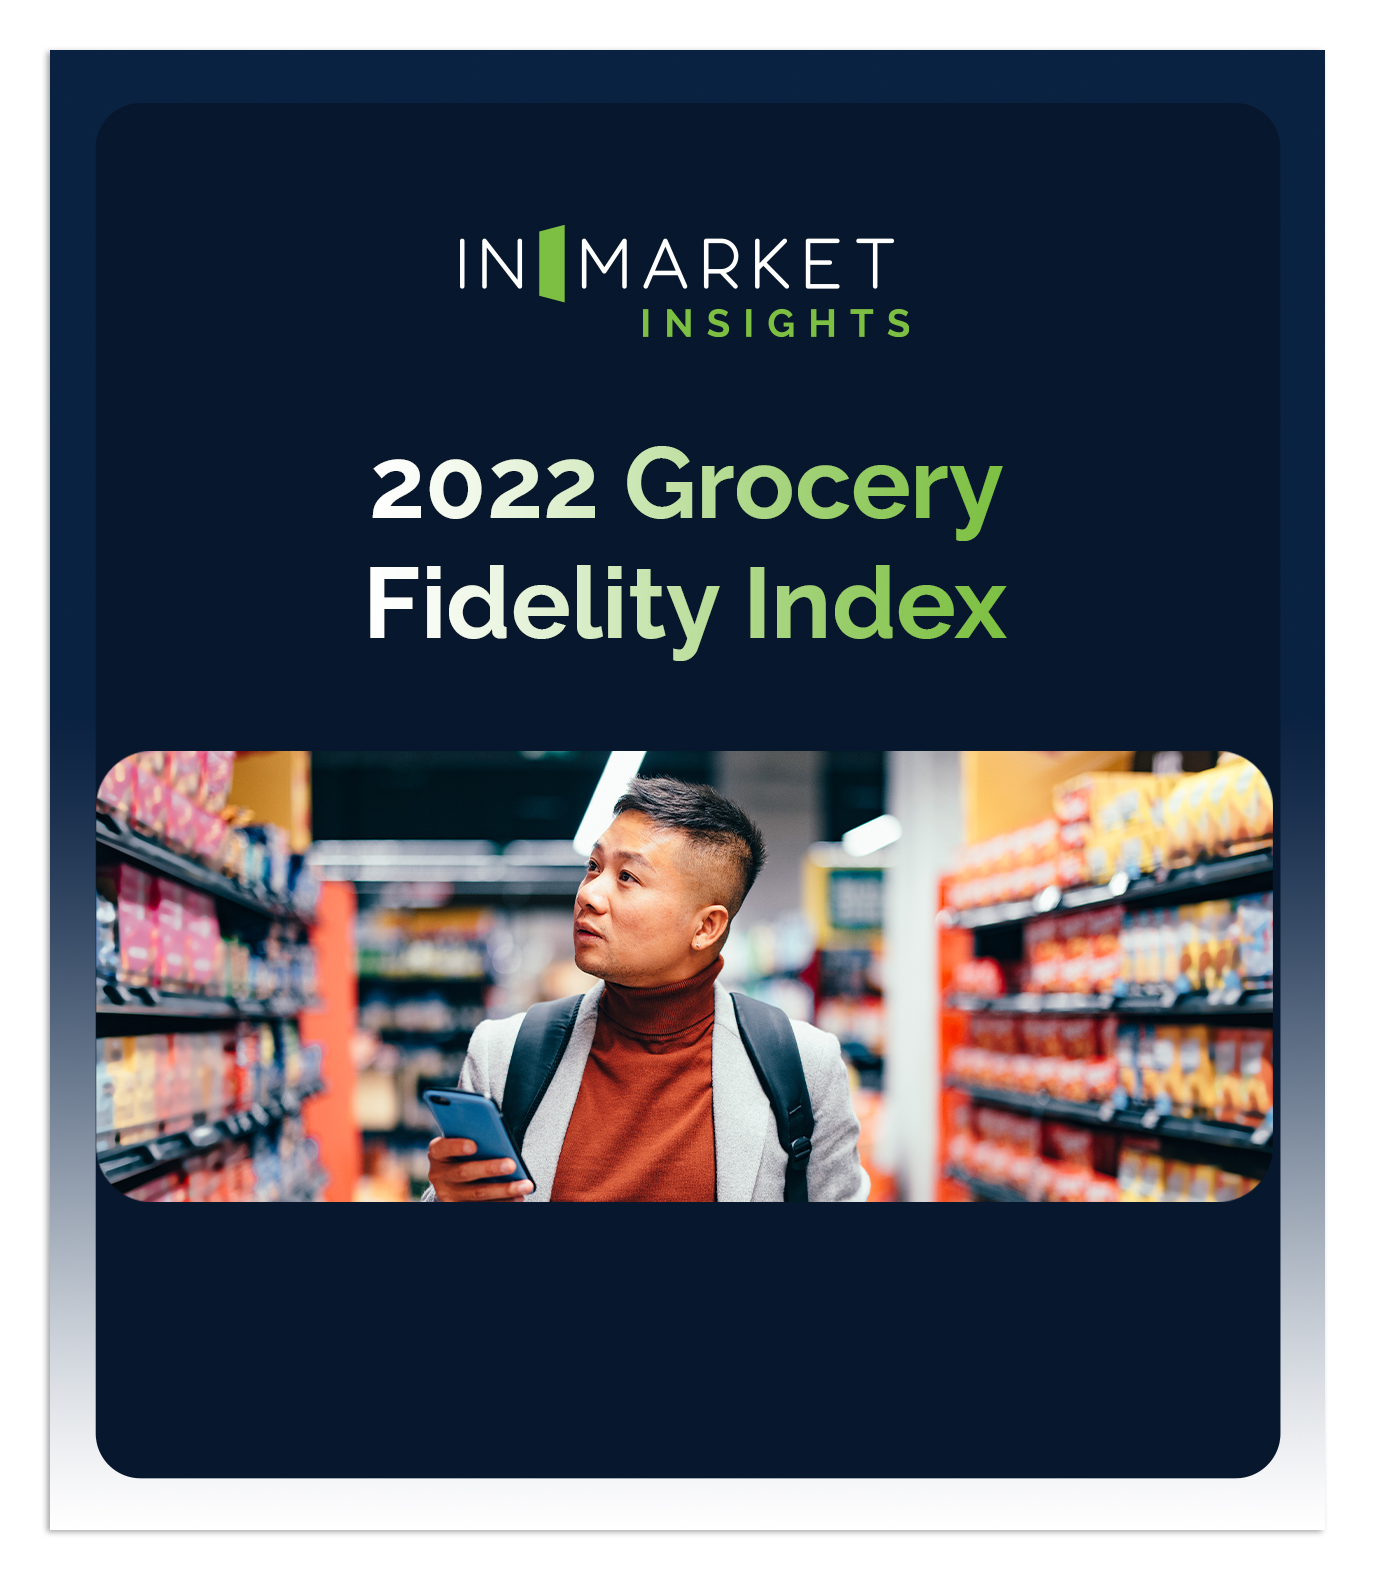 22-Grocery-fidelity-Cover Photo-dropped